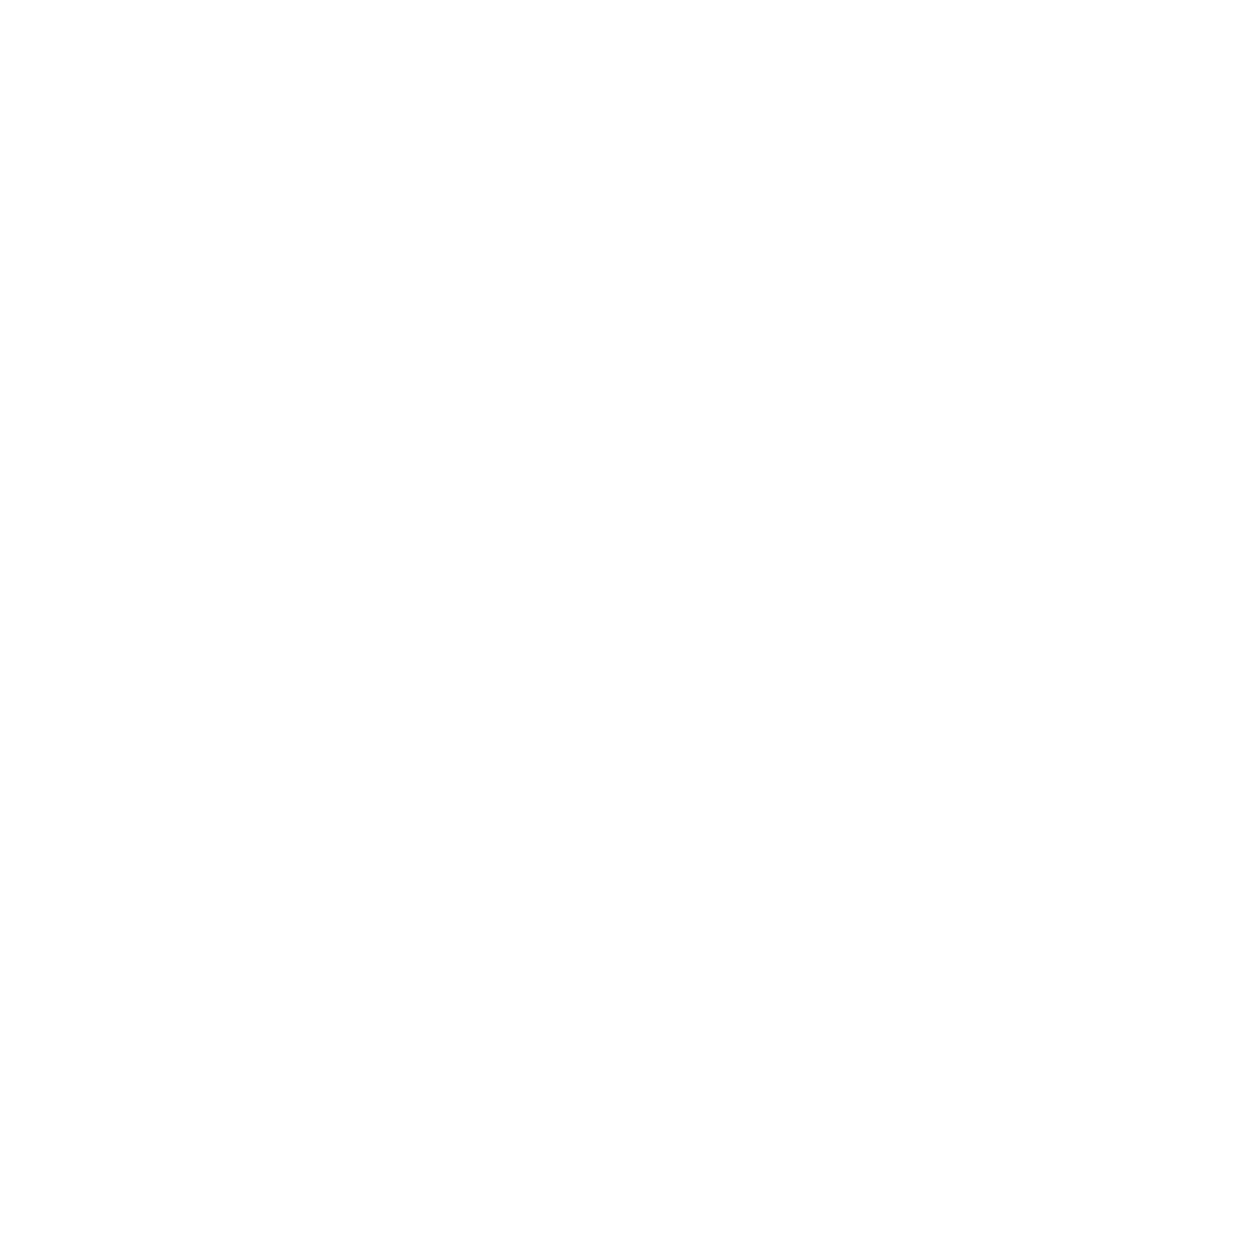 West Michigan Burial Forest